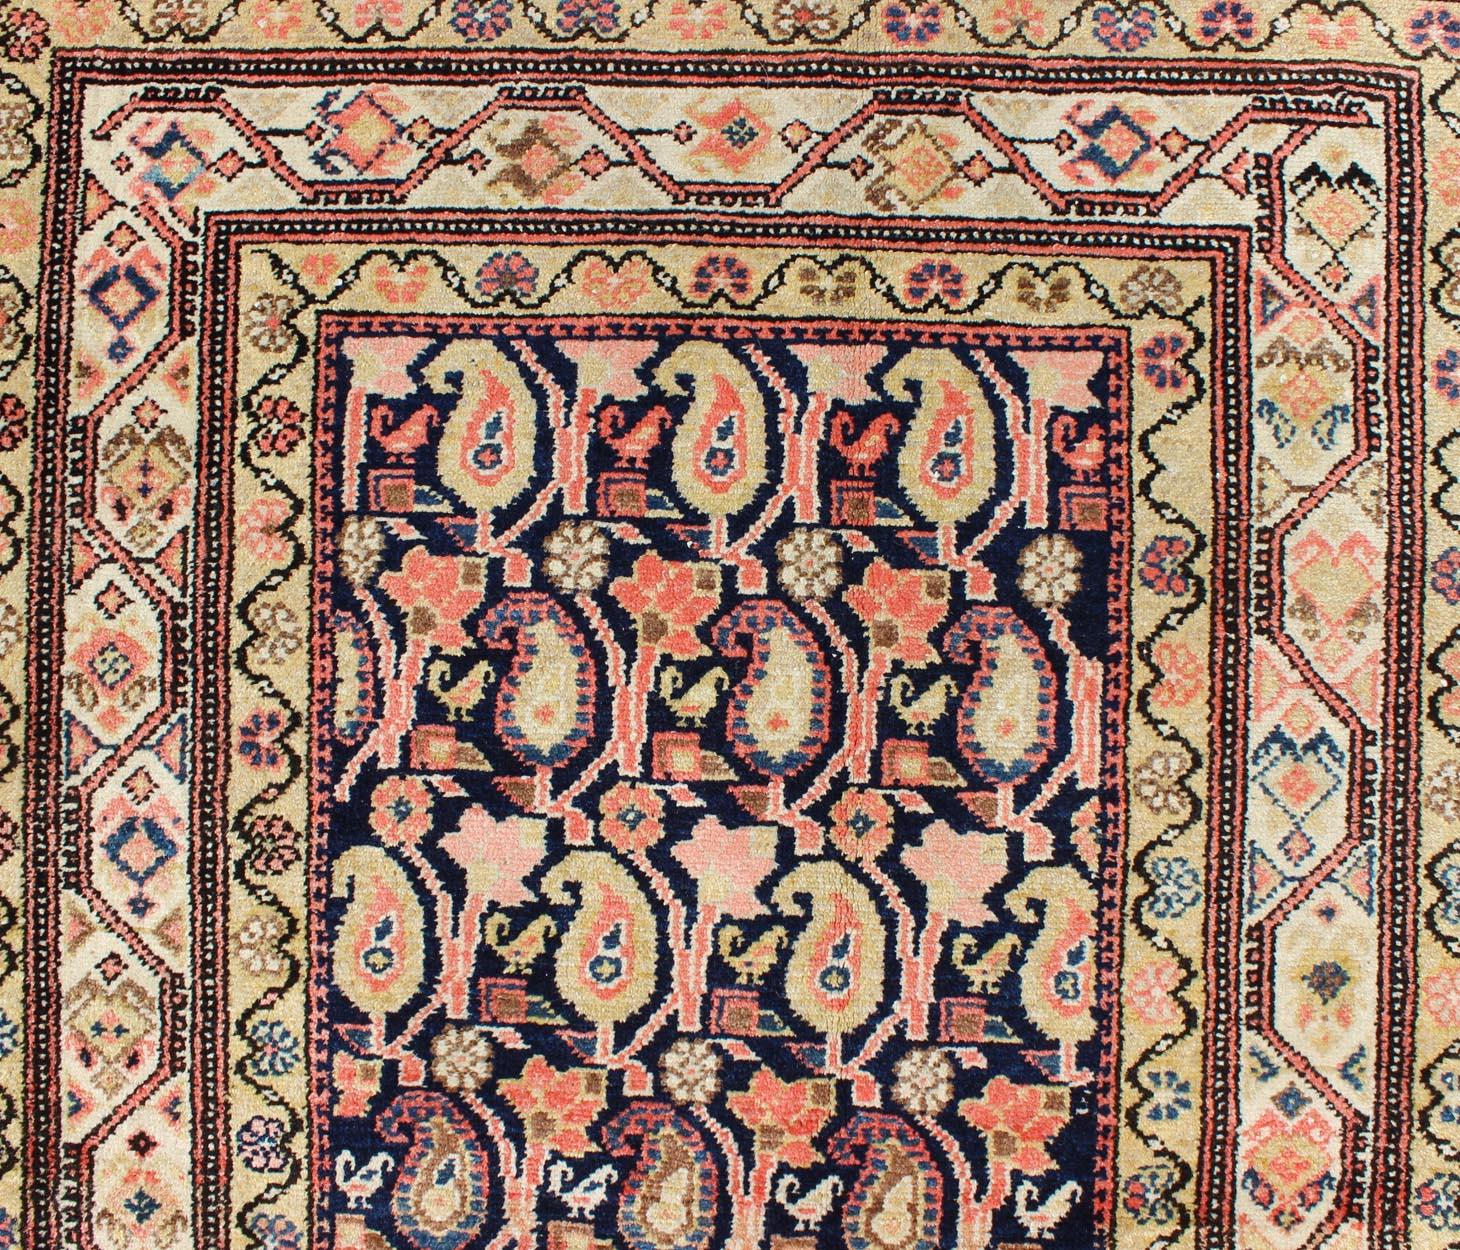 Wool Paisley Design Antique Persian Malayer Runner in Dark and Light Tones For Sale